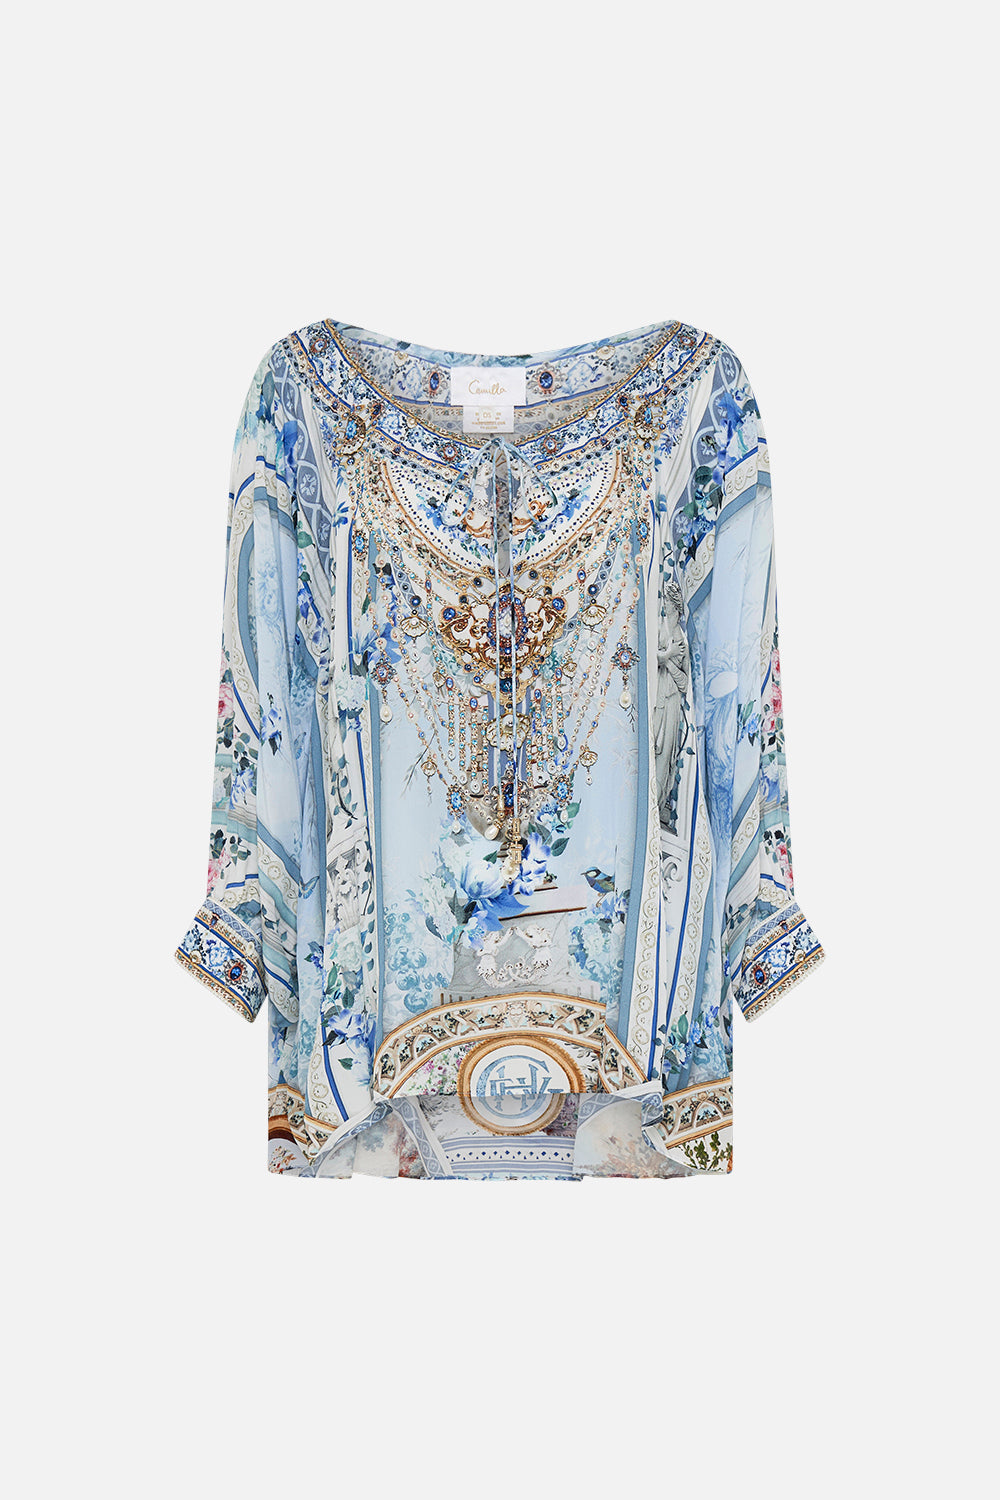 Product view of CAMILLA silk blouse in Season Of the Siren print